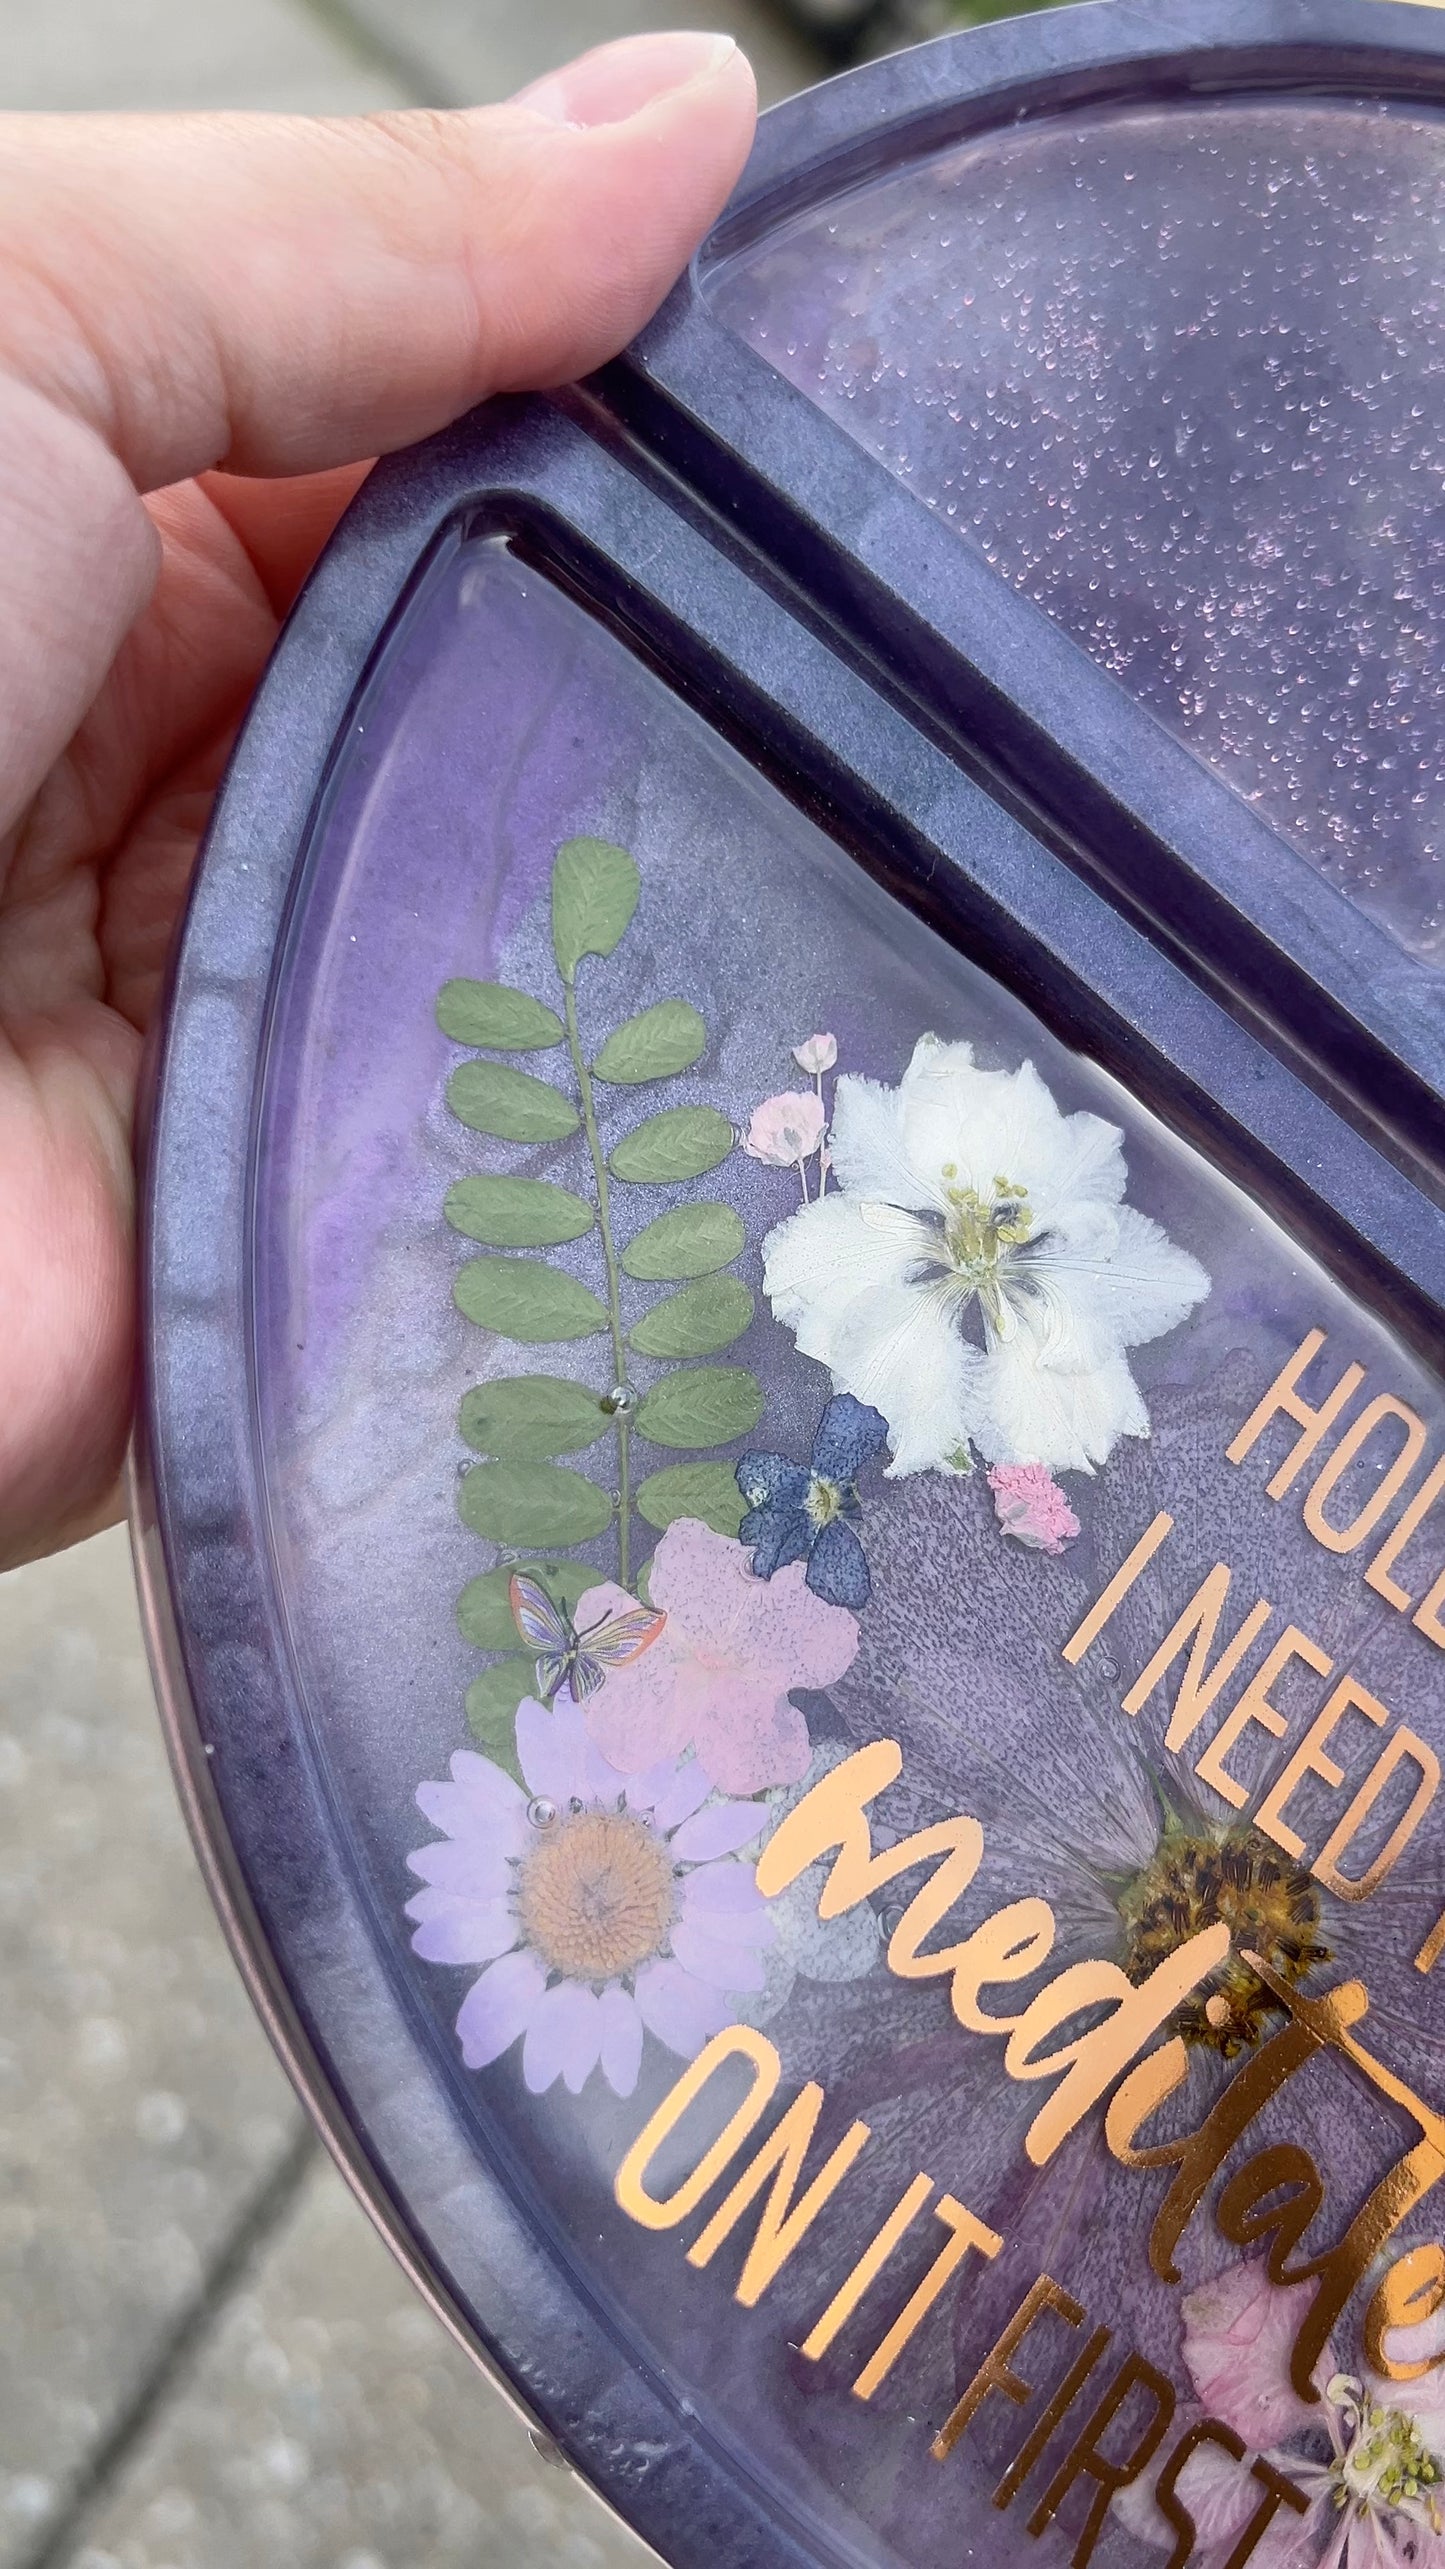 Hold On I Need to Meditate First - Floral Rolling Tray